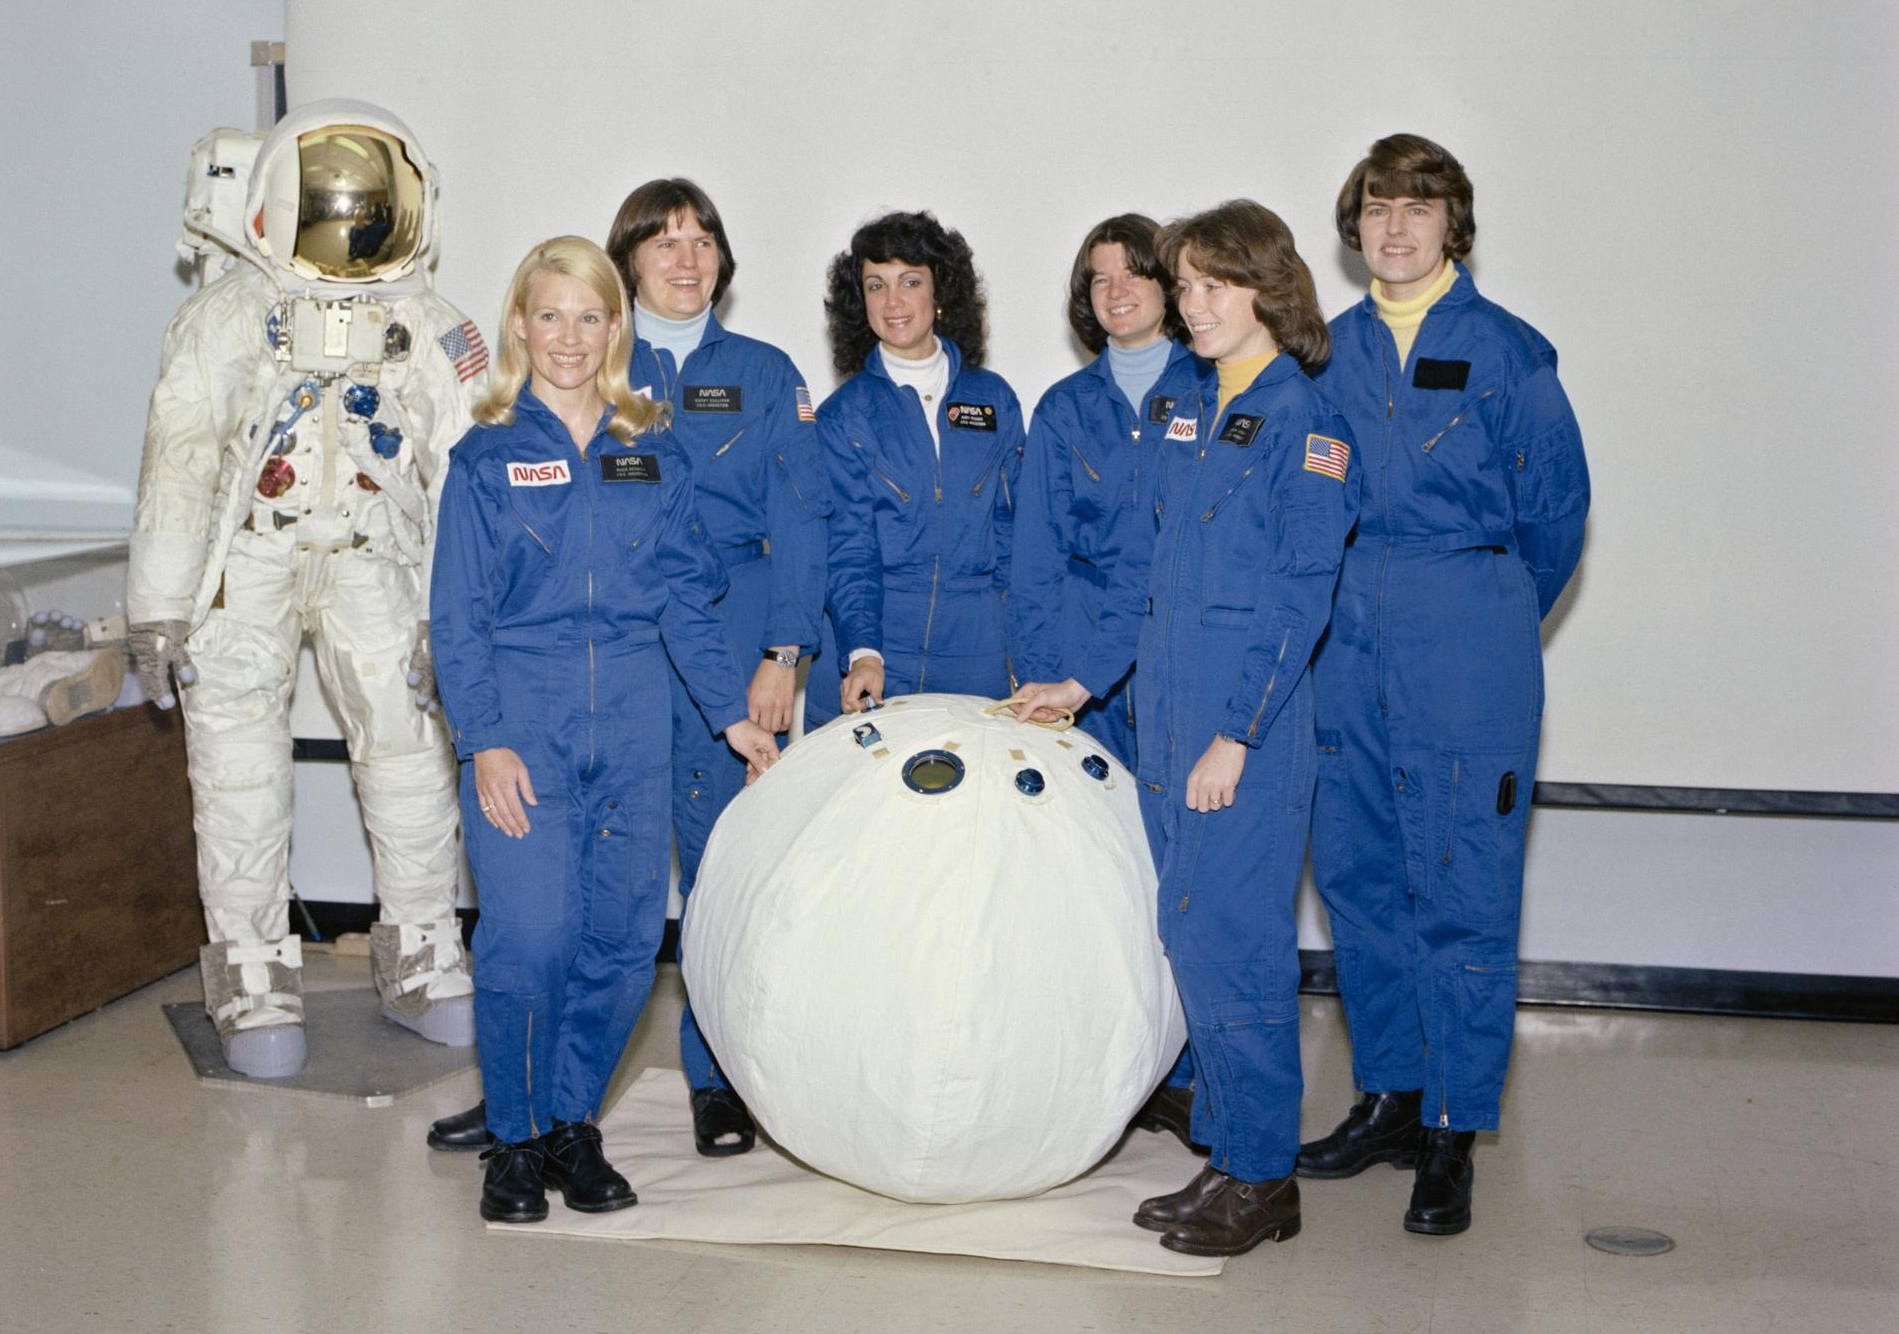 Six women stand in front of a white ball, with a mannequin wearing a space suit among them.